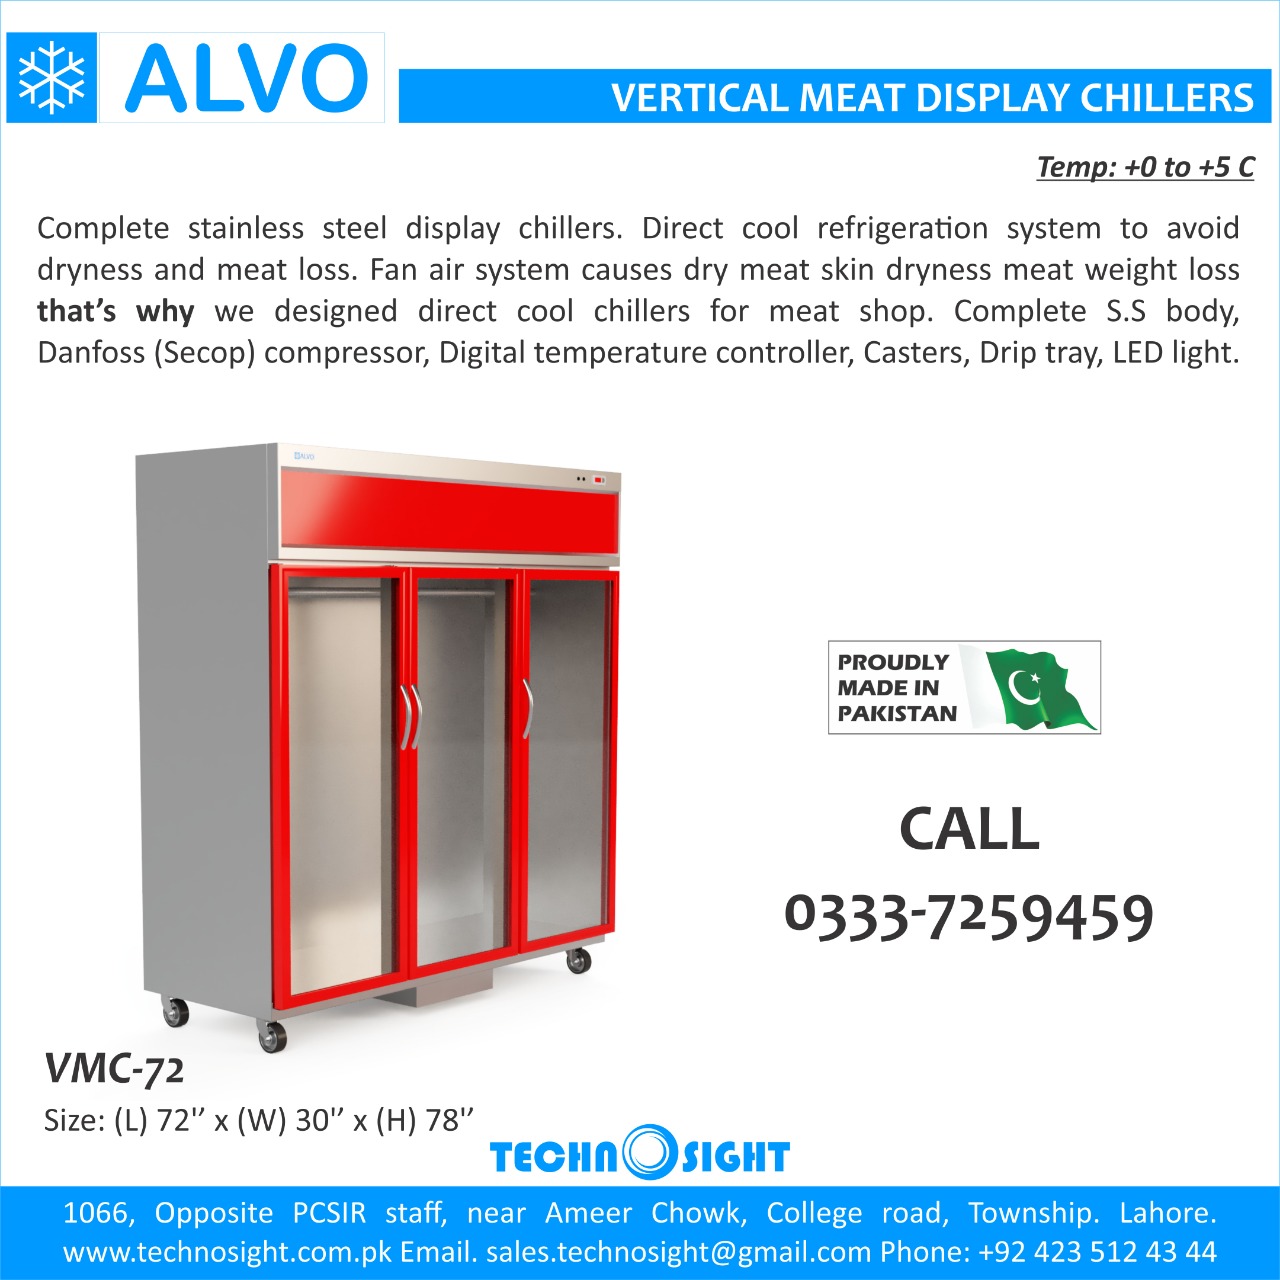 Meat Chiller for Meat Shops in Pakistan#Meat Display Chiller